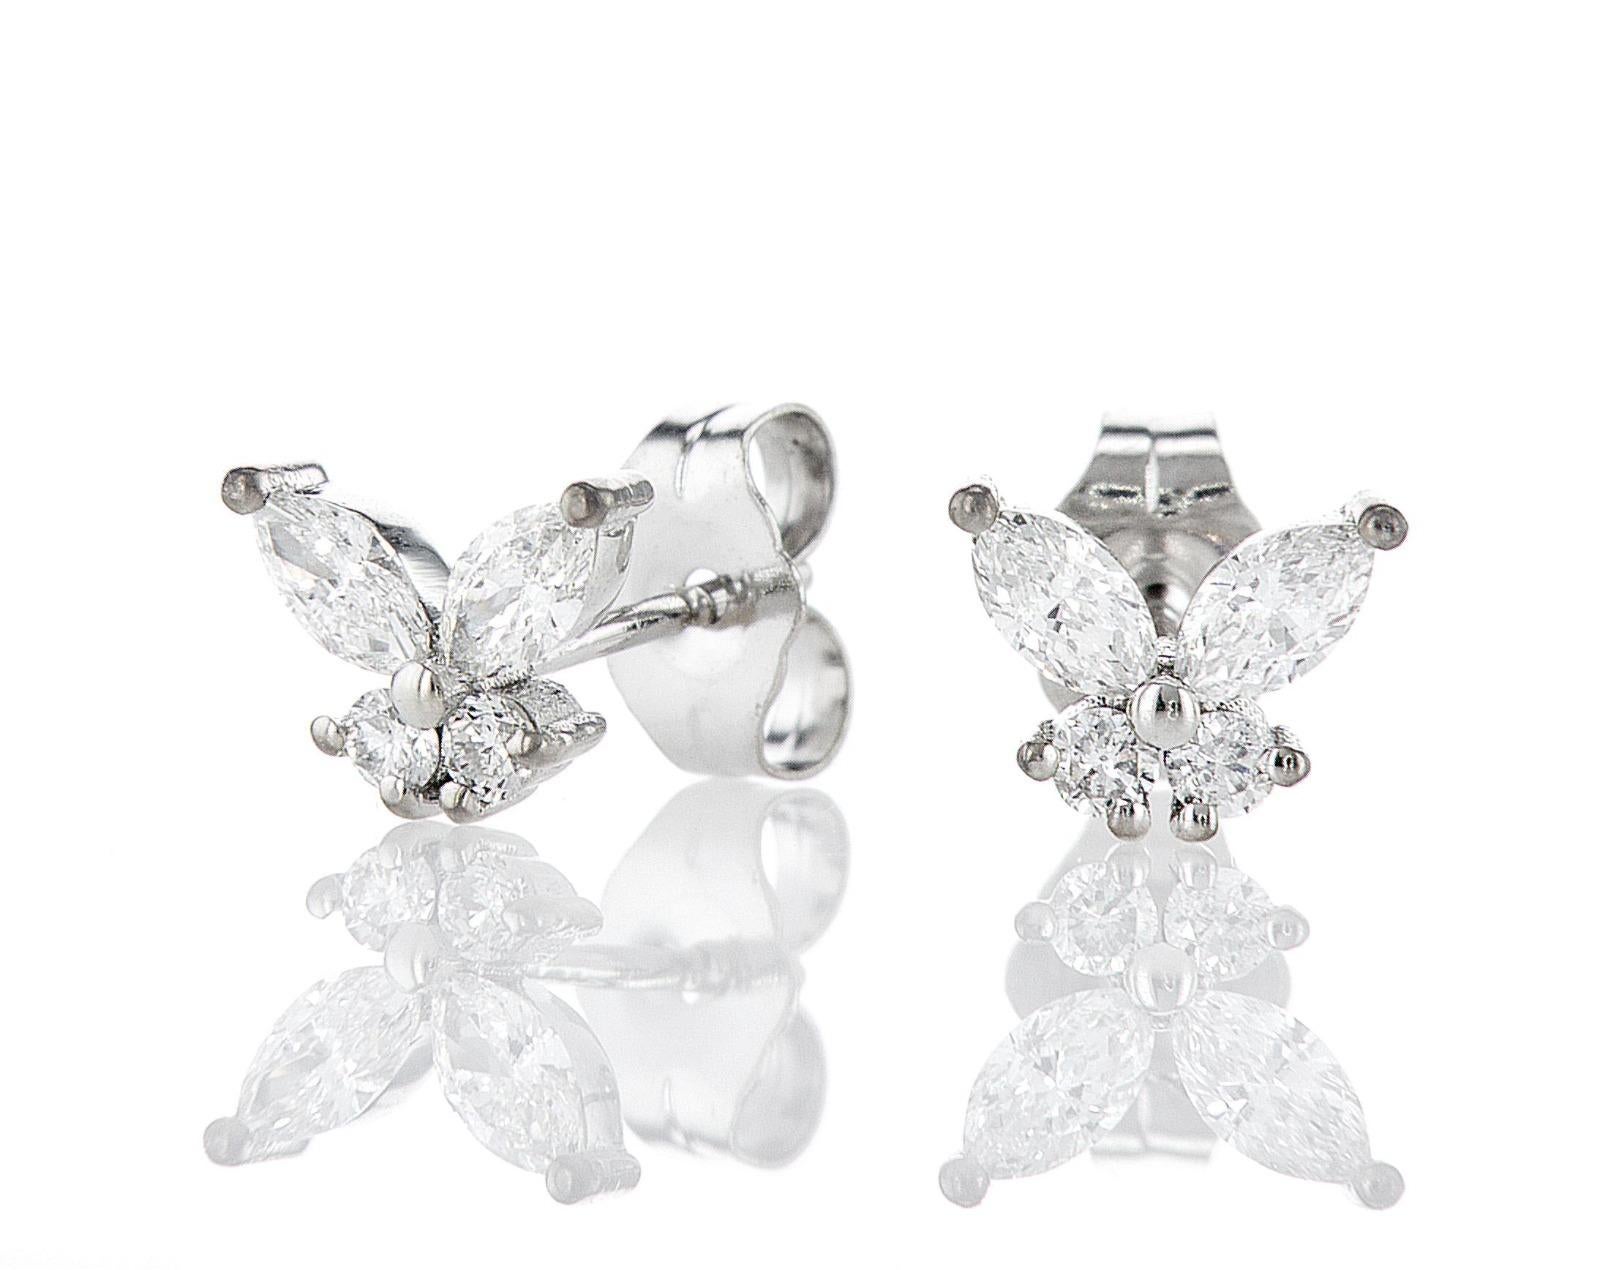 One of a kind timeless Butterfly Diamond Earrings that will always stay in fashion. 
The sparkly earrings are mounted on 14K white gold and set with high quality marquise and round cut diamonds D-E / VVS-VS, creating two delicate beautiful